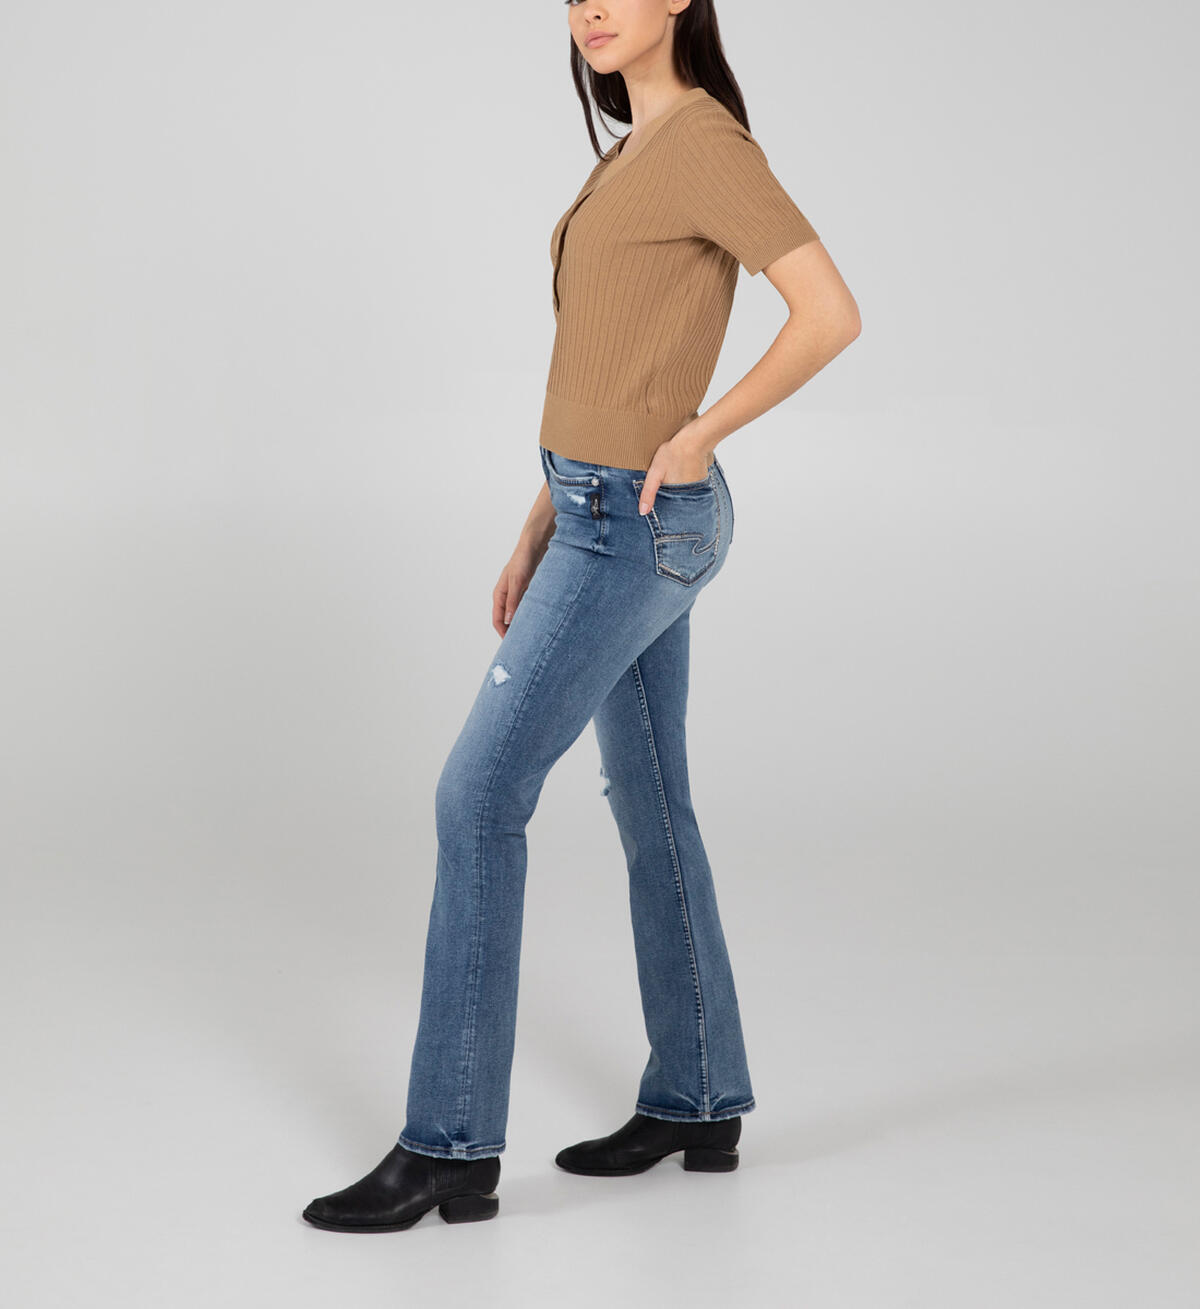 Avery High Rise Slim Bootcut Jeans, , hi-res image number 2